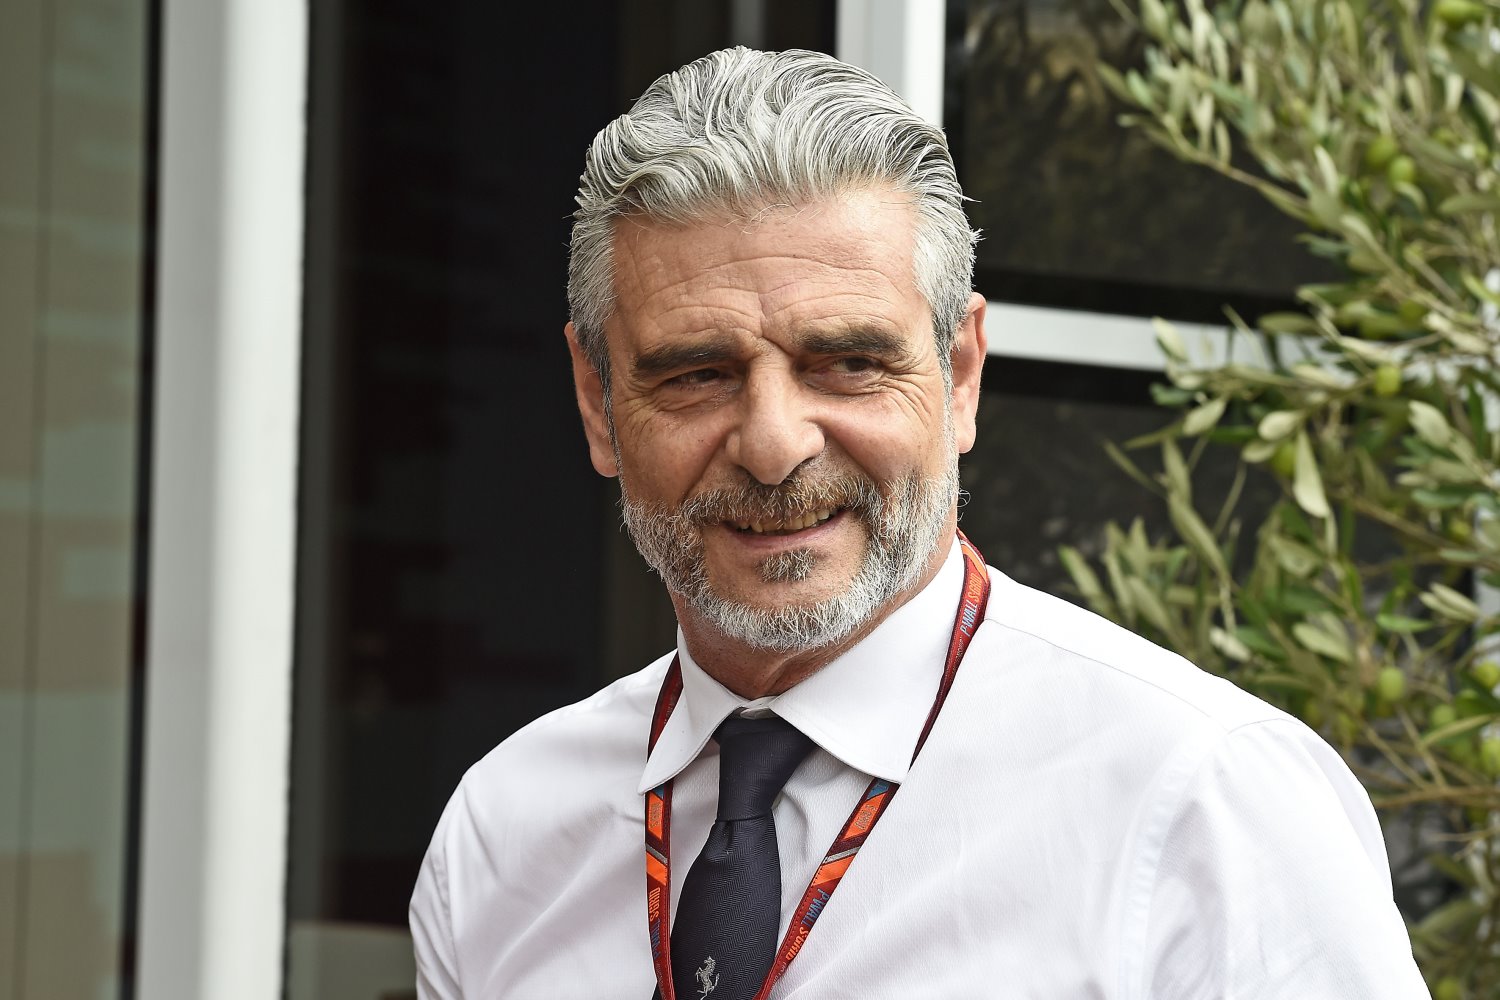 Arrivabene seen laughing his arse off - he was fired and Binotto took his place. Ferrari is now a dumpster fire